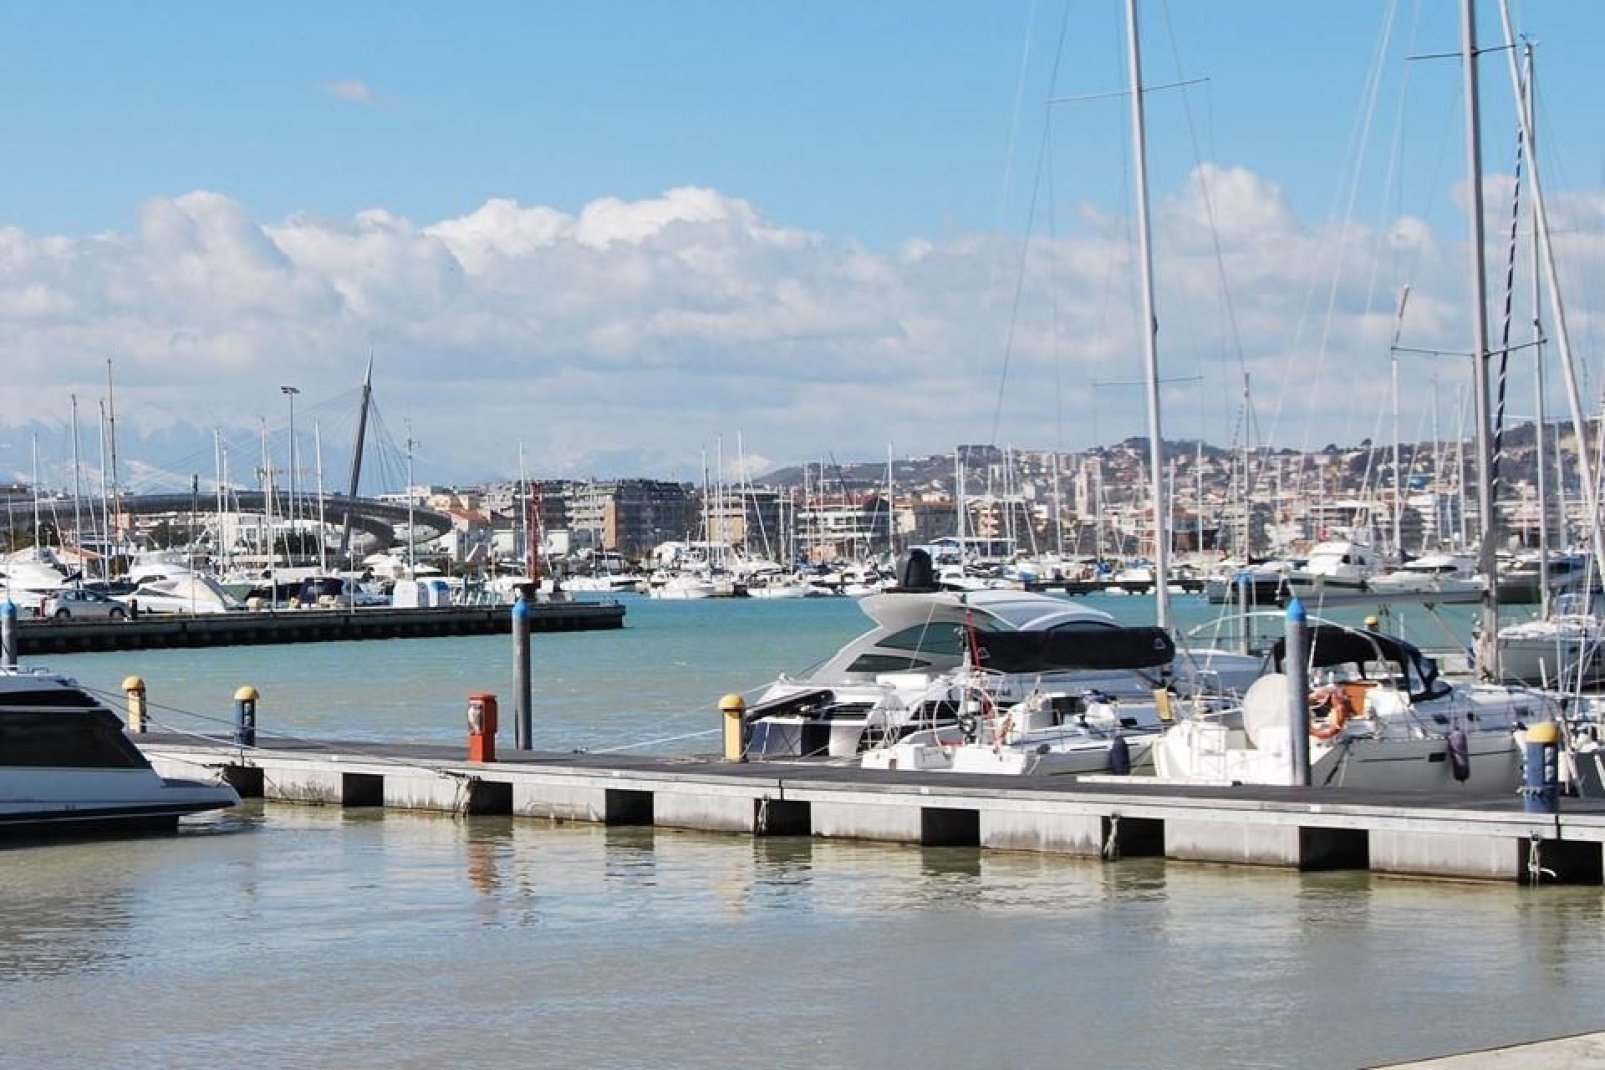 As well as being home to many beaches, Pescara is rich in history dating back to pre-Roman times.